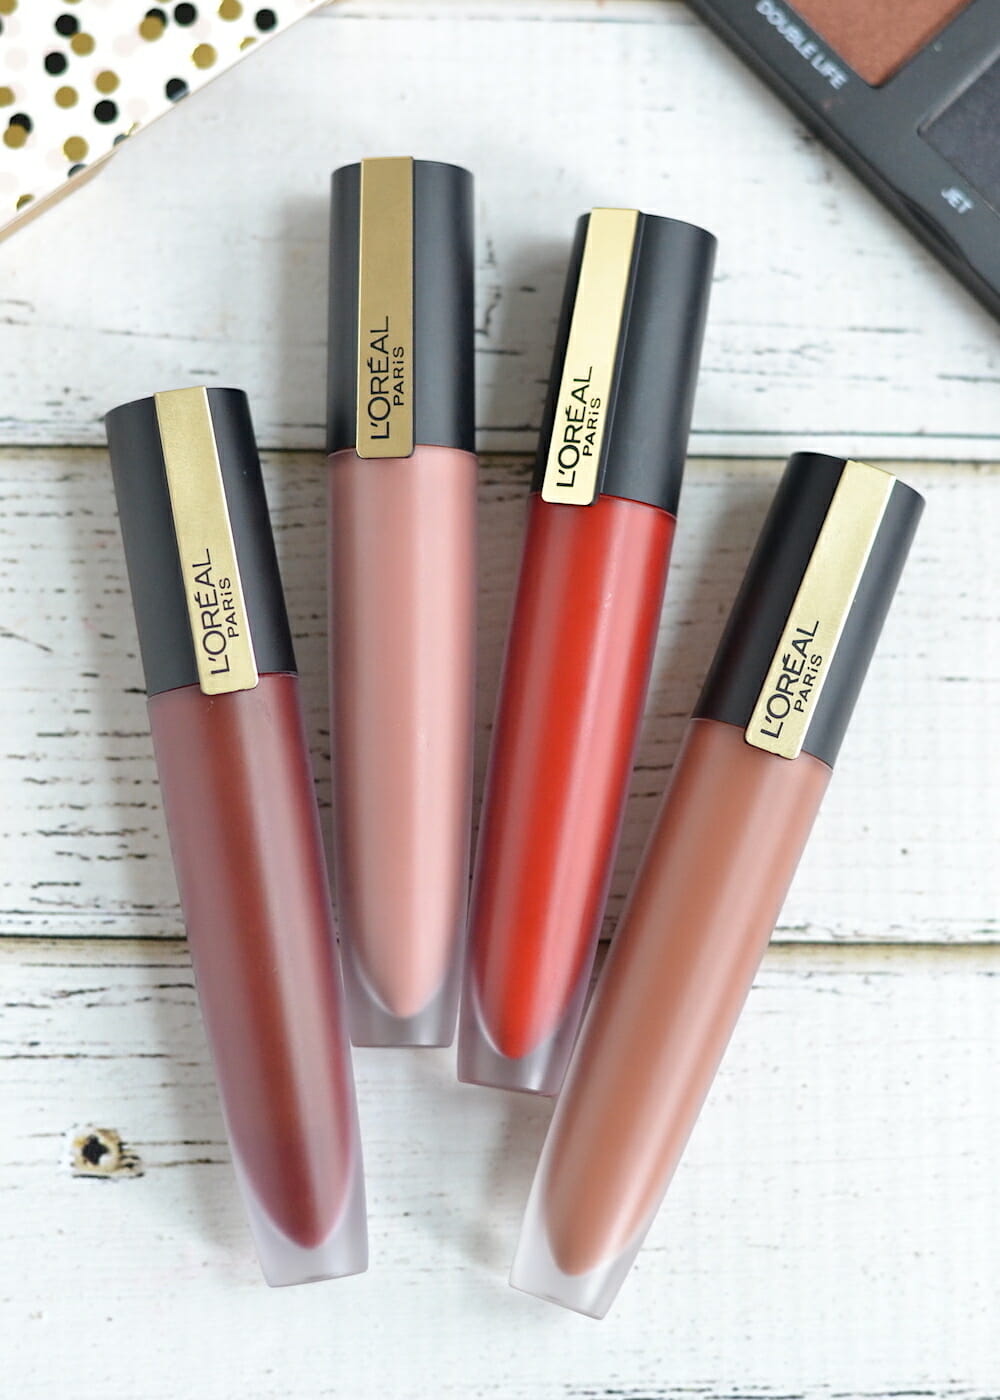 L'Oreal Rouge Signature Matte Liquid Lipstick swatches and review